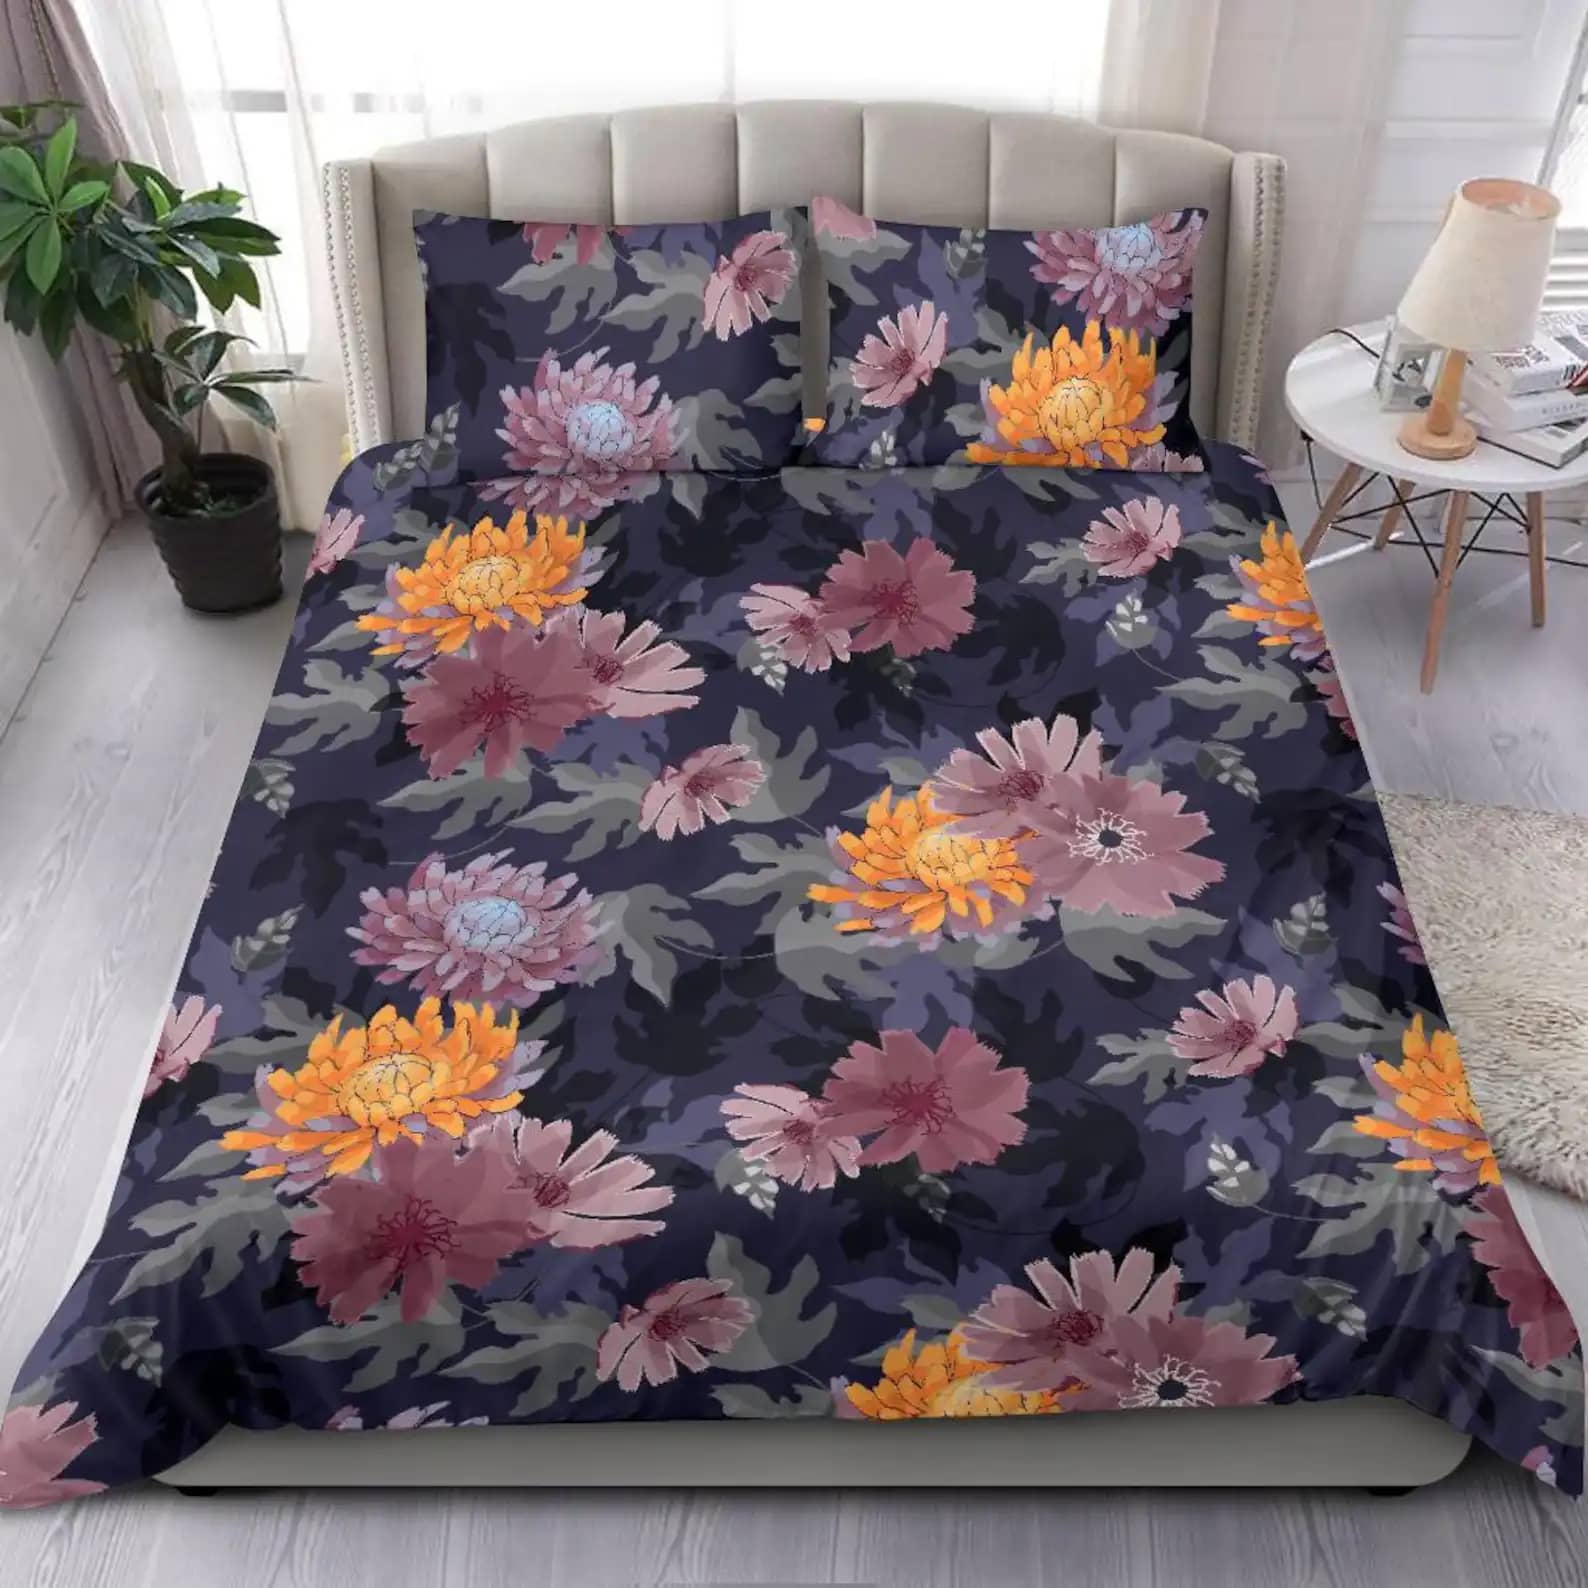 Purple Morning Magnificence Quilt Bedding Sets